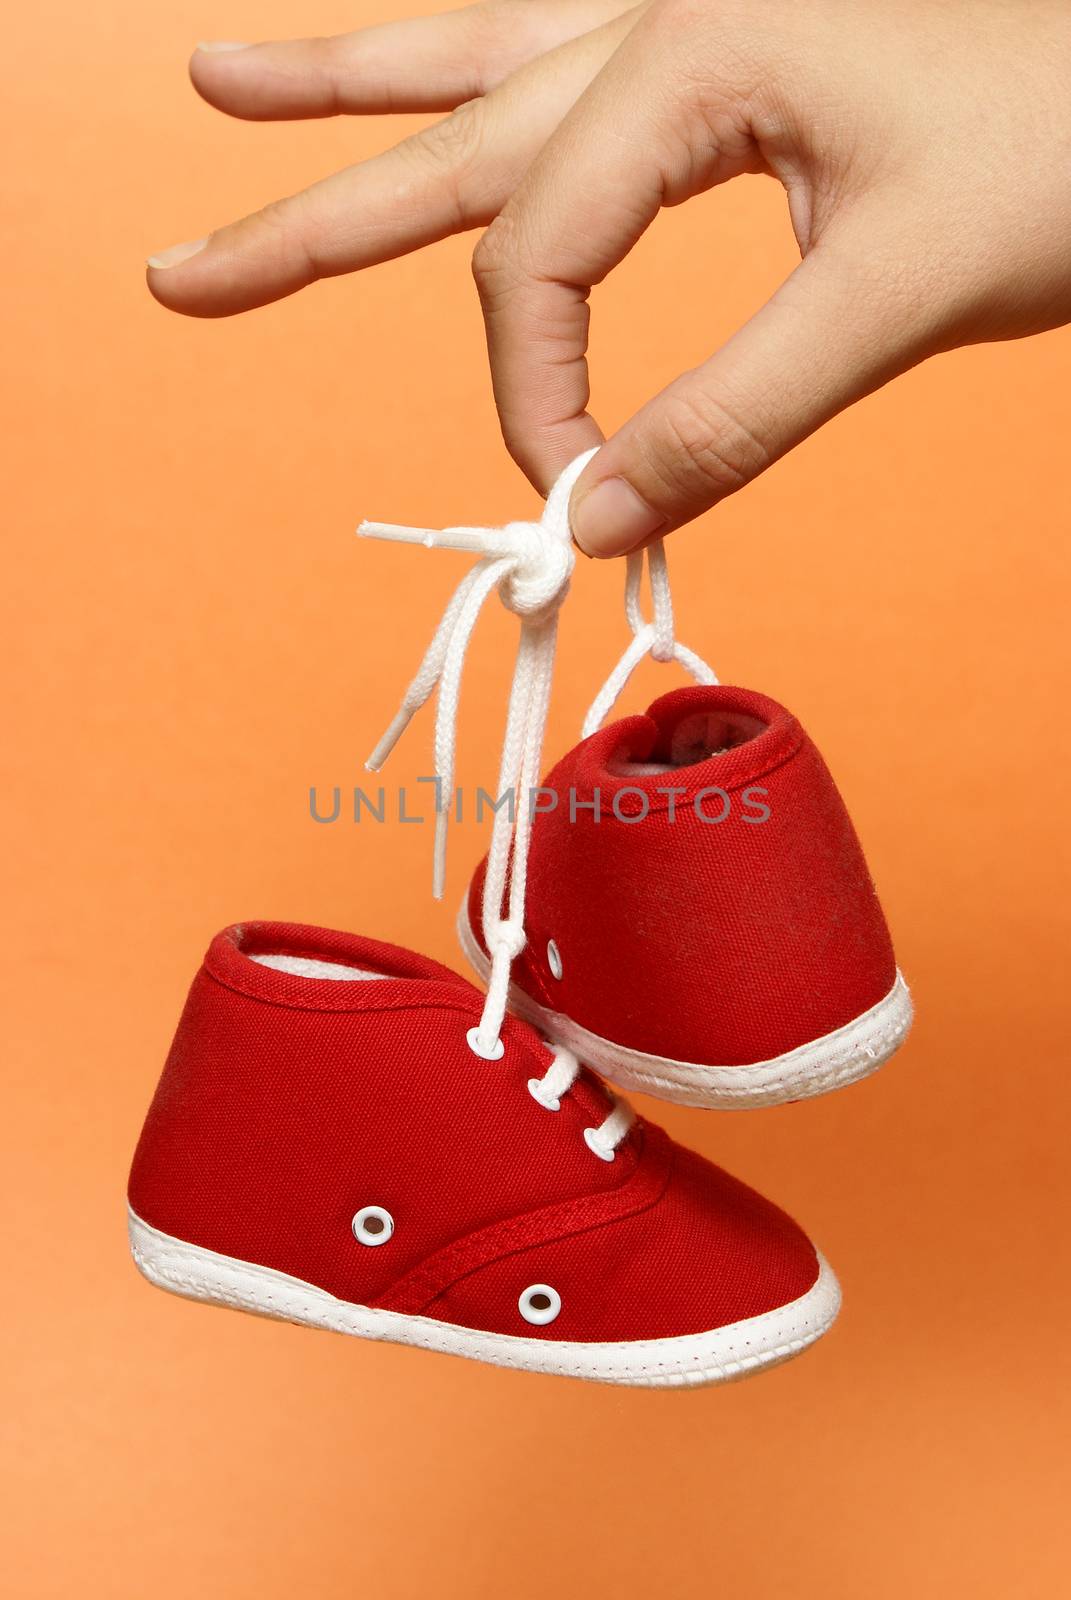 A mother holds on to a pair of baby shoes.